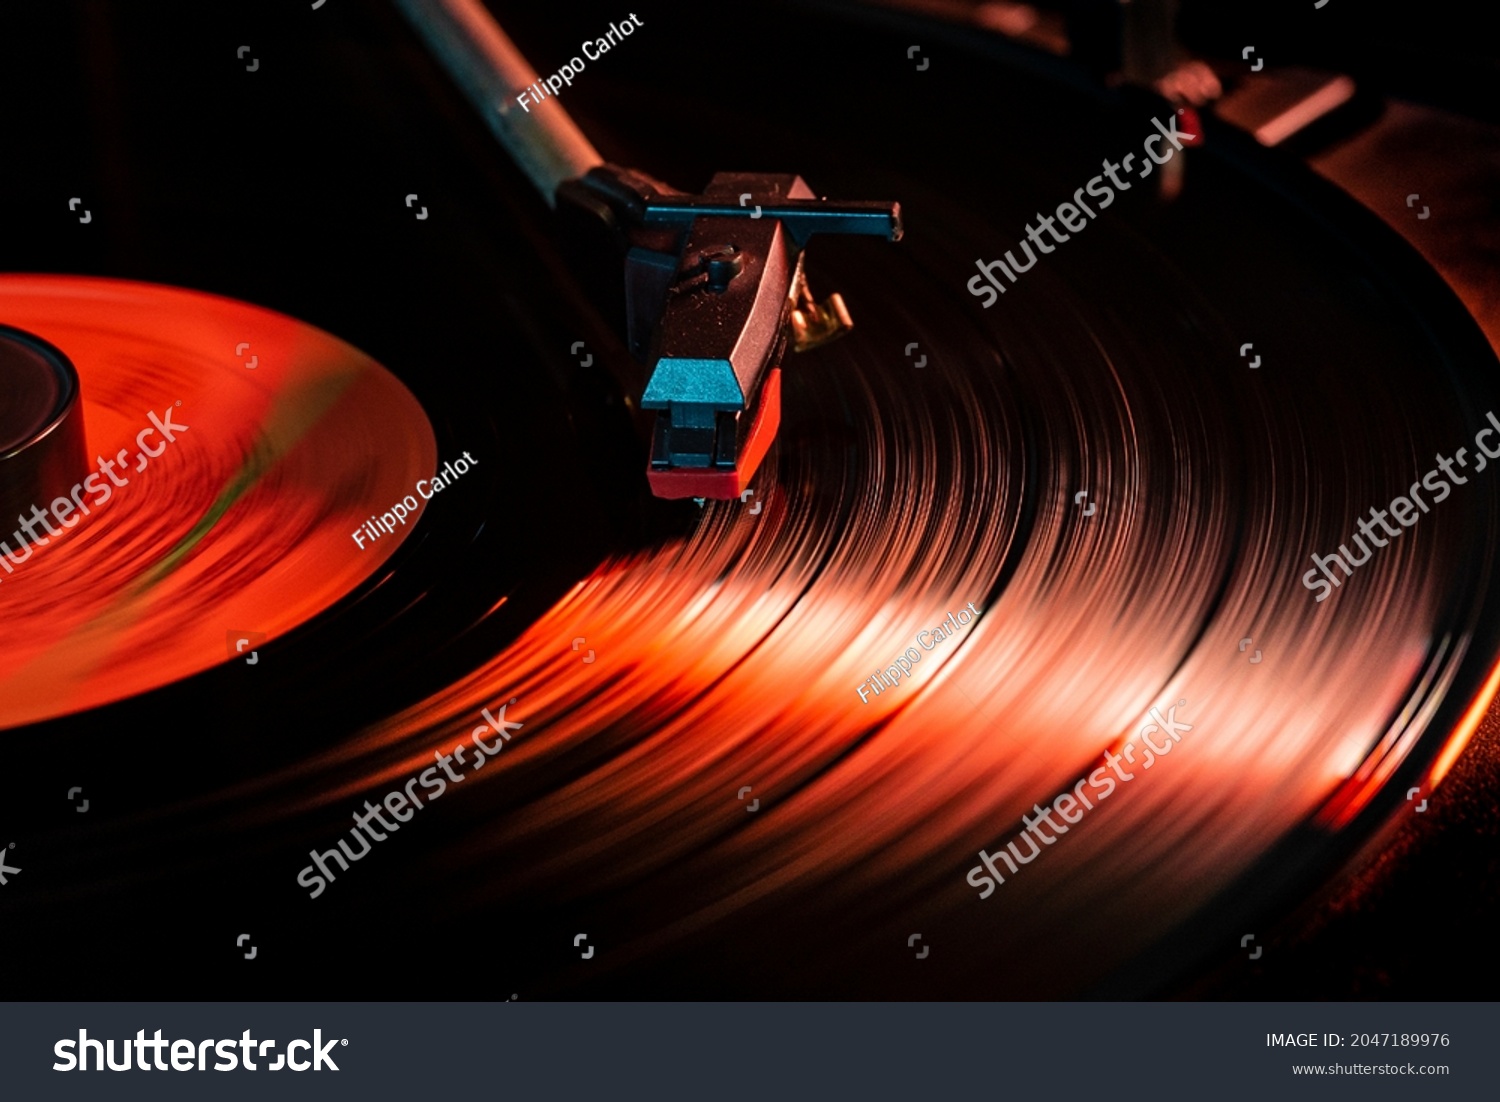 Needle detail on vinyl record on turntable, low light image with reflection #2047189976